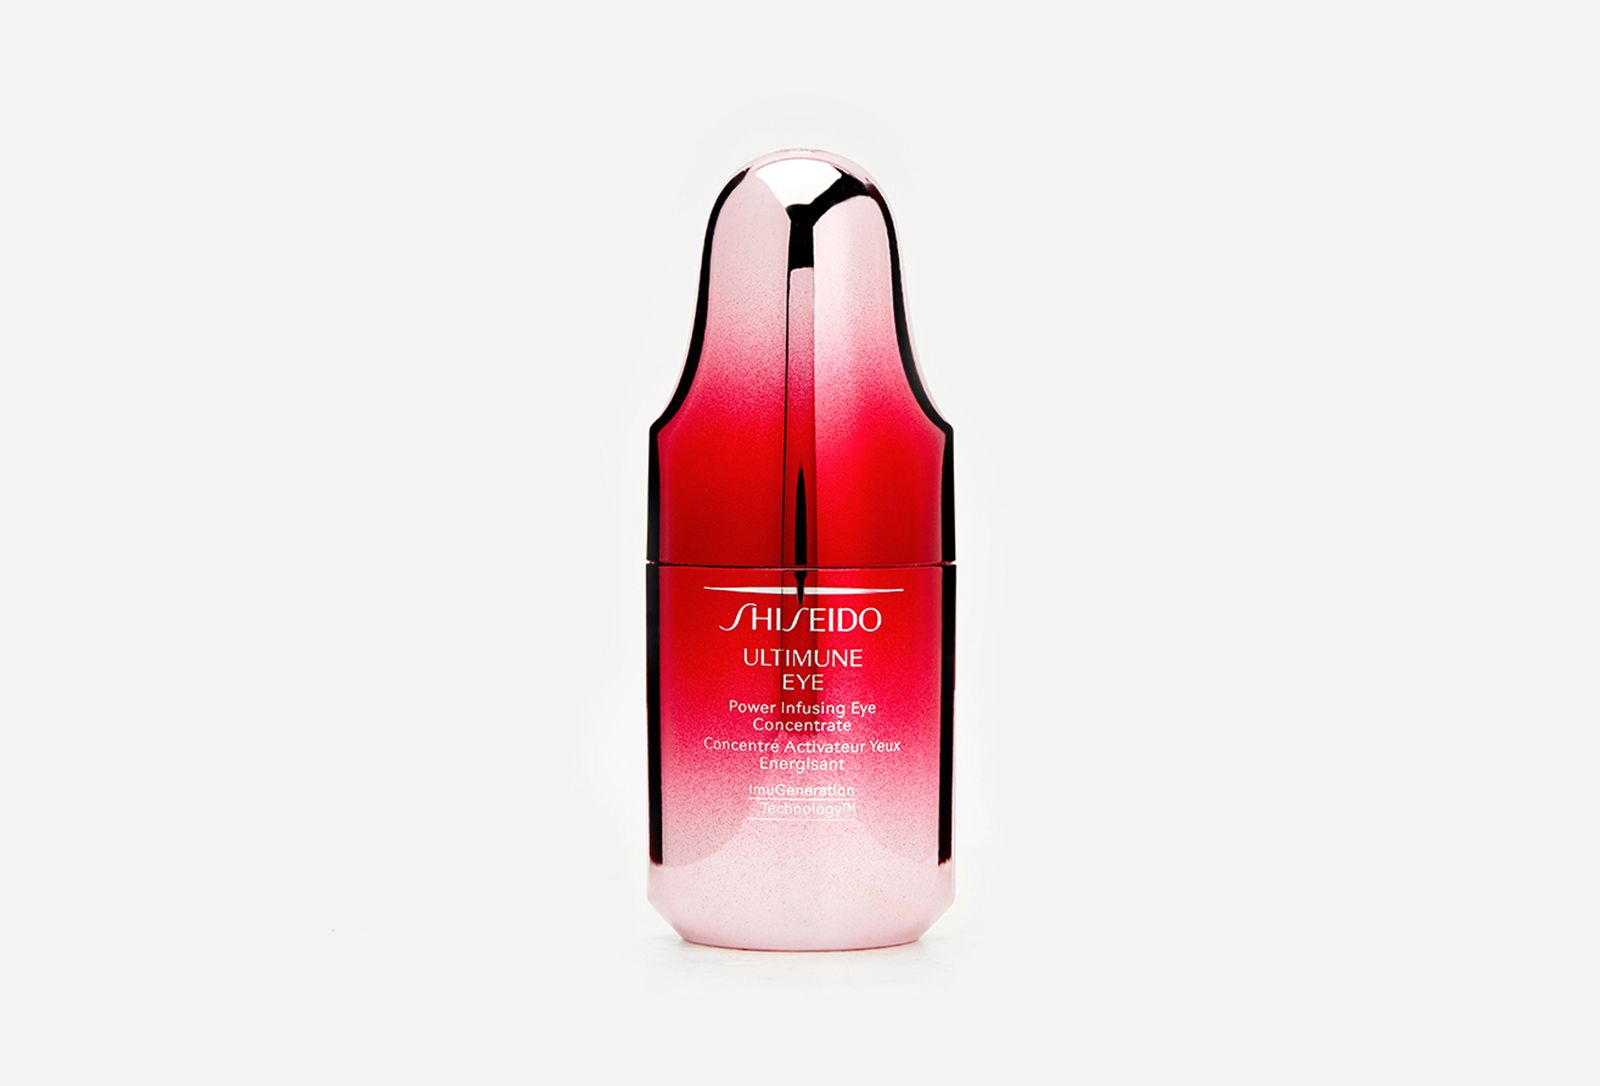 Shiseido ultimune power infusing concentrate. Ultimune концентрат шисейдо Power infusing. Концентрат Shiseido Ultimune Power infusing Concentrate. Shiseido Ultimate Power infusing. Shiseido Ultimate Serum.